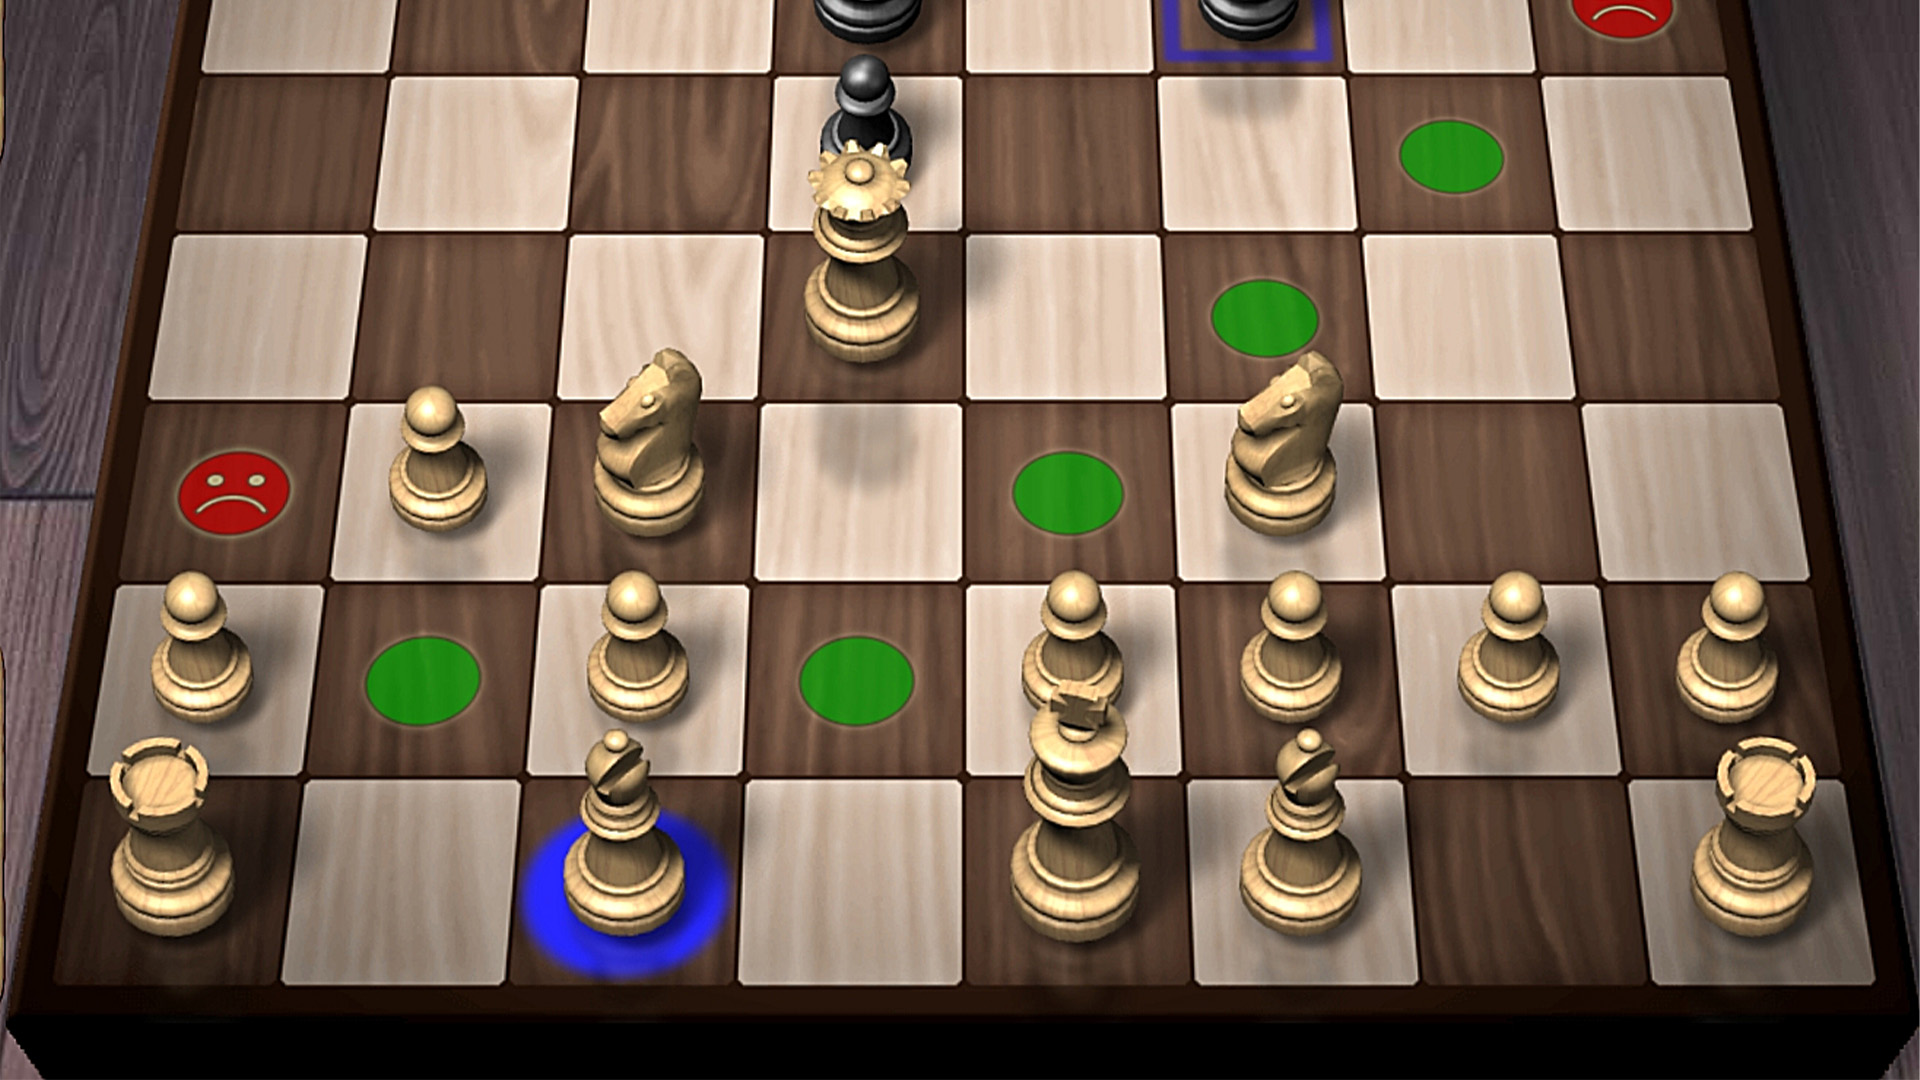 10 best chess games for Android - Android Authority